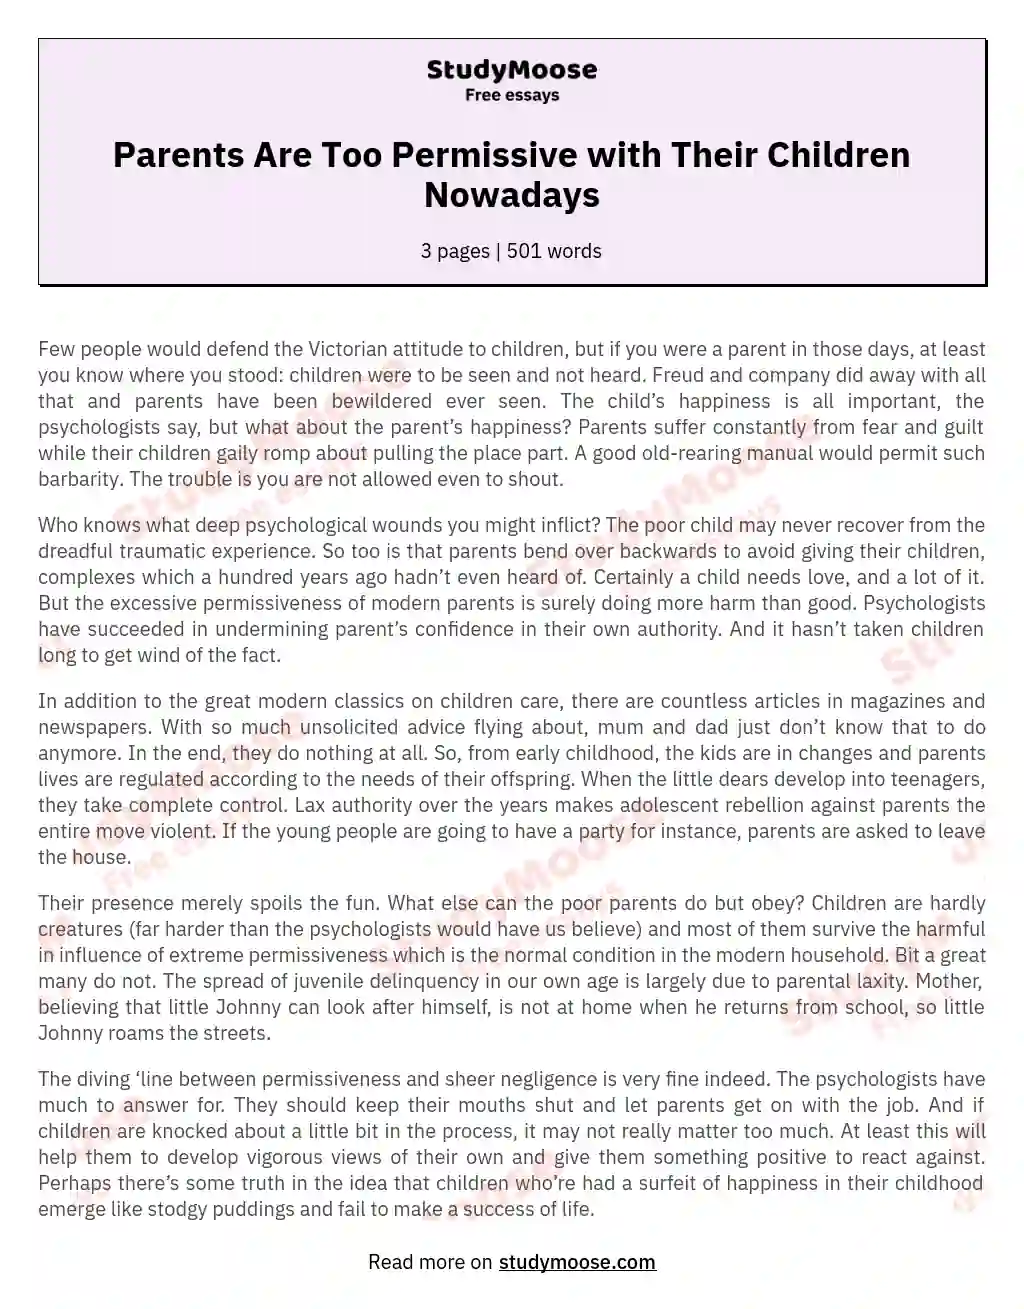 Parents Are Too Permissive with Their Children Nowadays essay